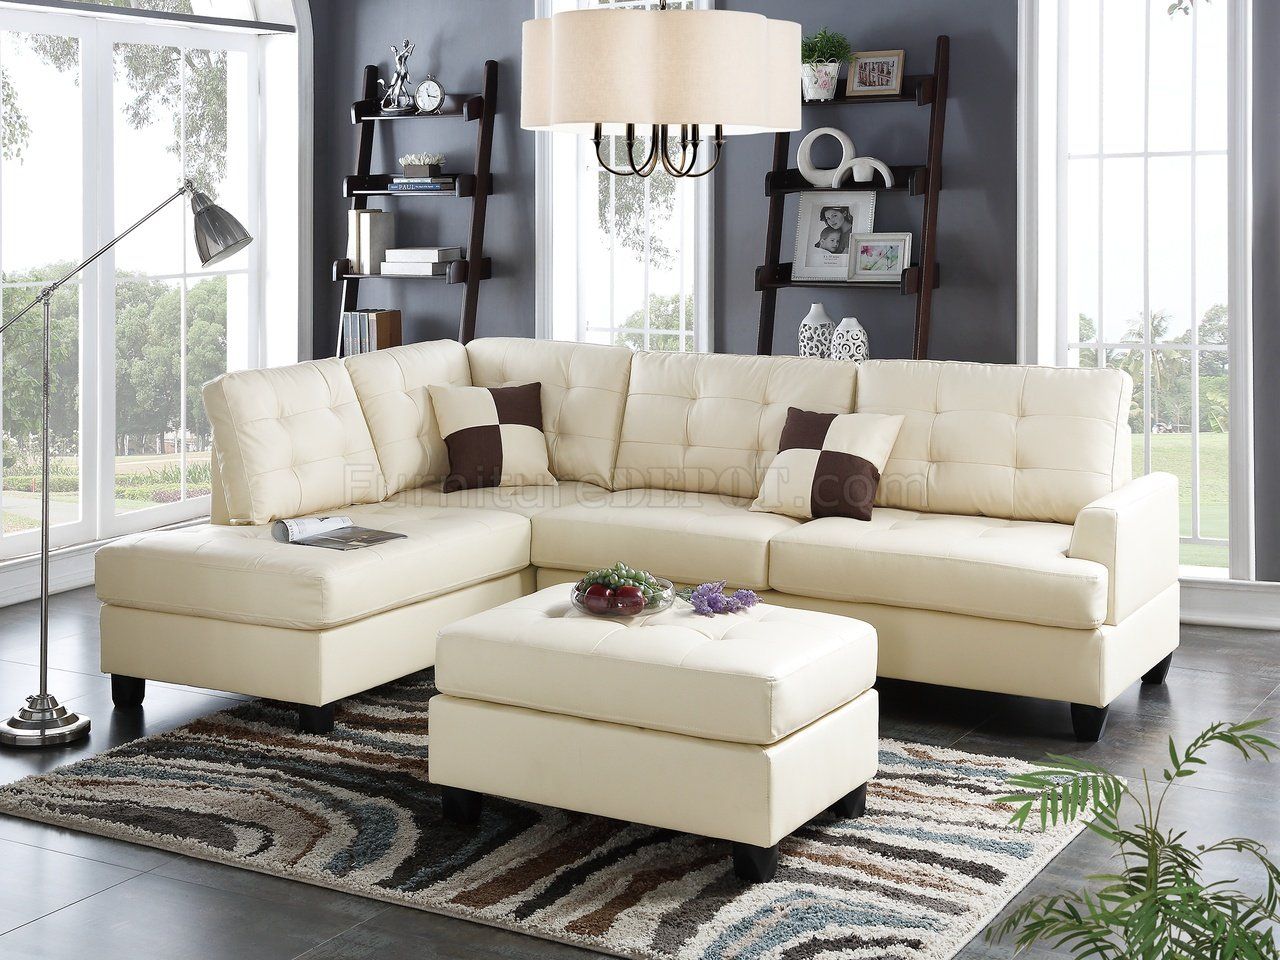 F6856 Sectional Sofa 3pc In Beige Faux Leatherboss Within Small L Shaped Sectional Sofas In Beige (View 13 of 21)